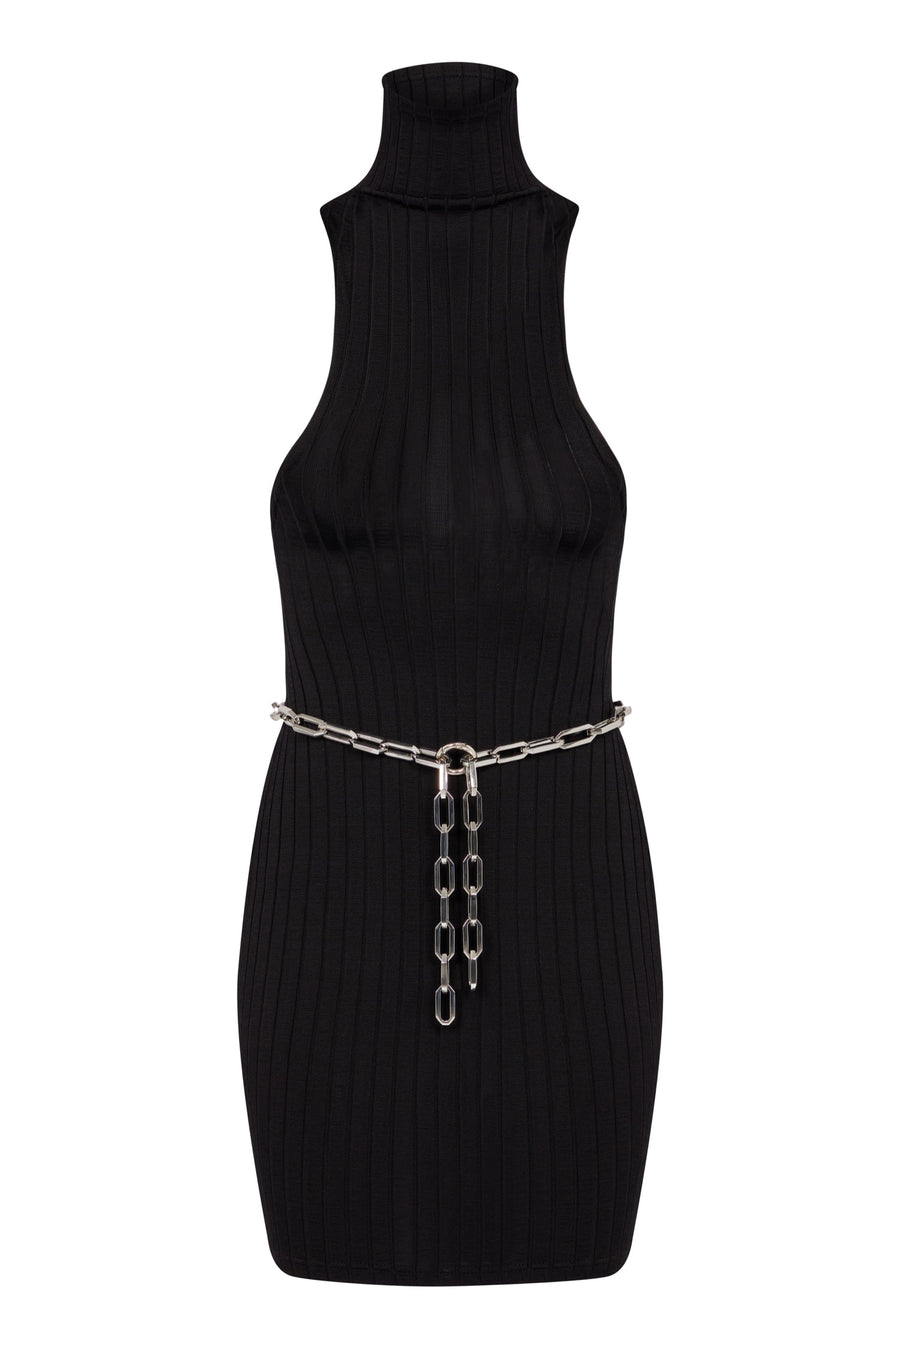 High Neck Jersey Mini Dress With Chain Belt | Made in London